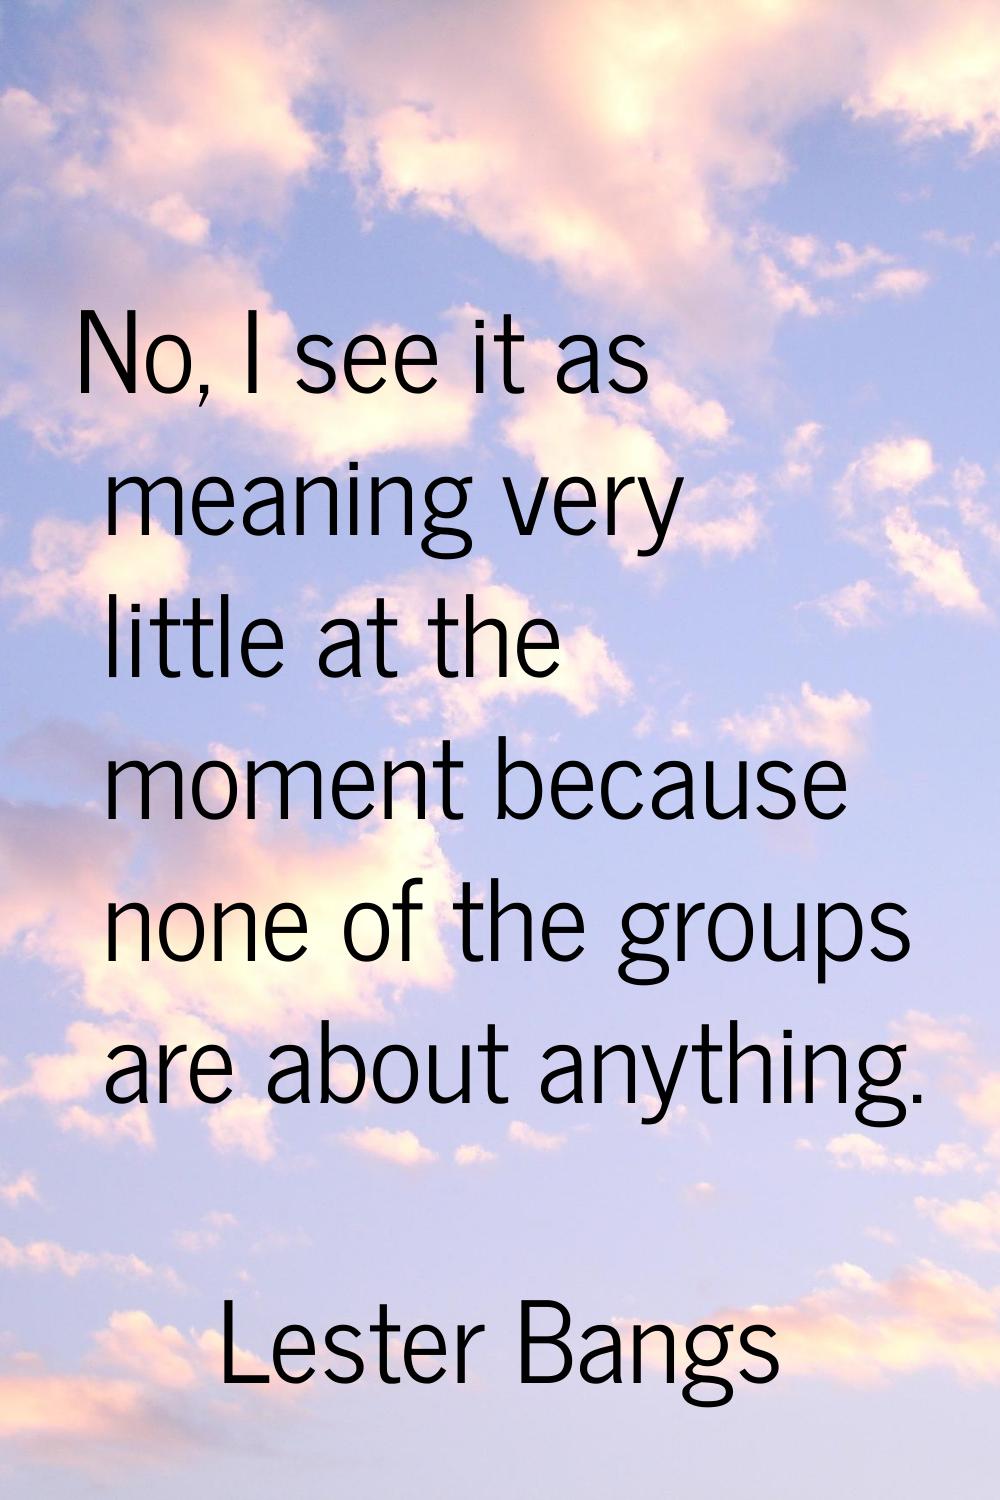 No, I see it as meaning very little at the moment because none of the groups are about anything.